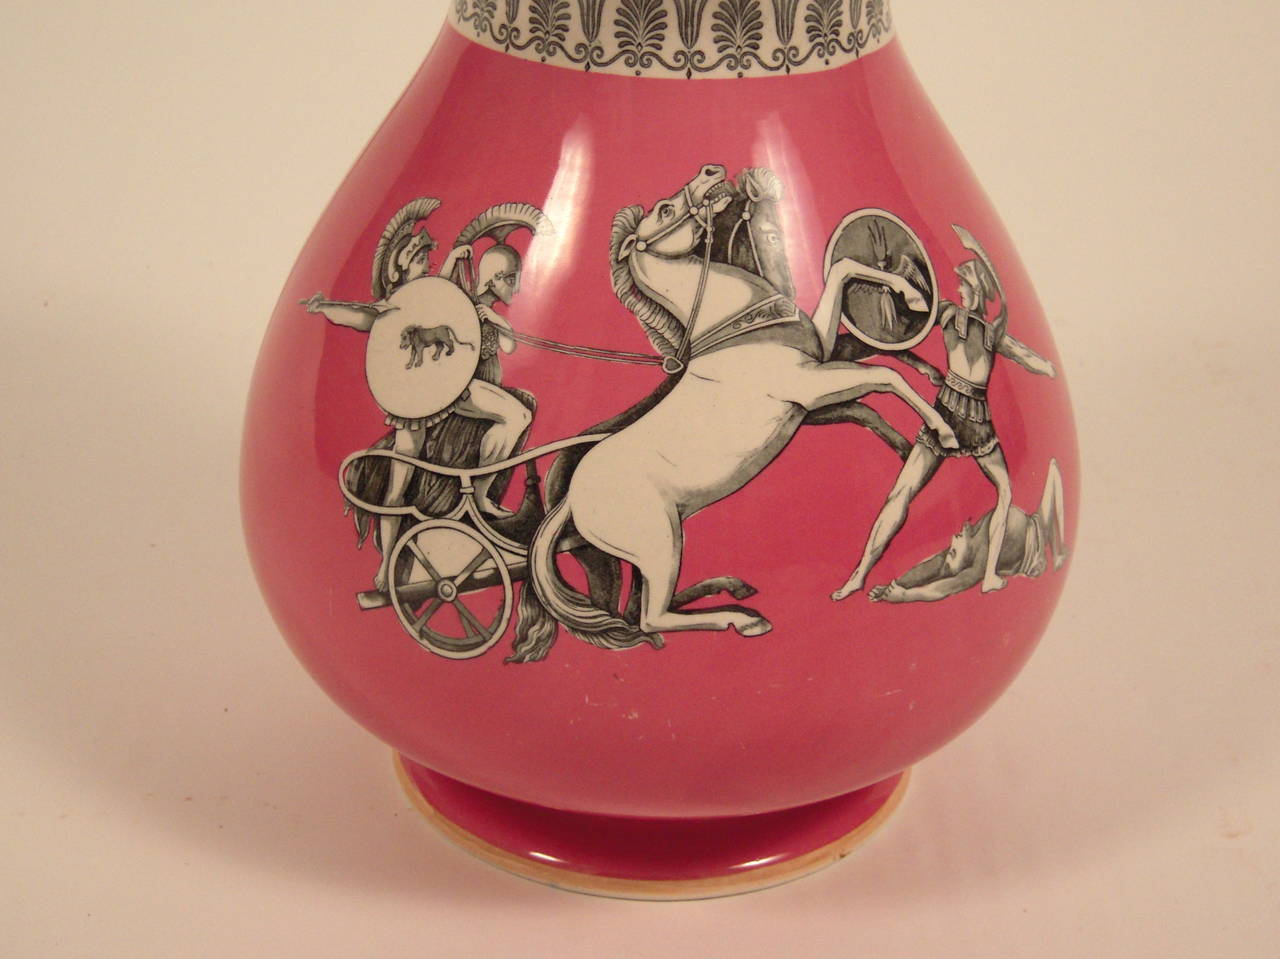 A large pink 19th century Ridgeway Staffordshire vase decorated with black and white neoclassical scenes below a band of stylized anthemion (honeysuckle), the light orange colored everted rim decorated with a black and white Greek key band on the